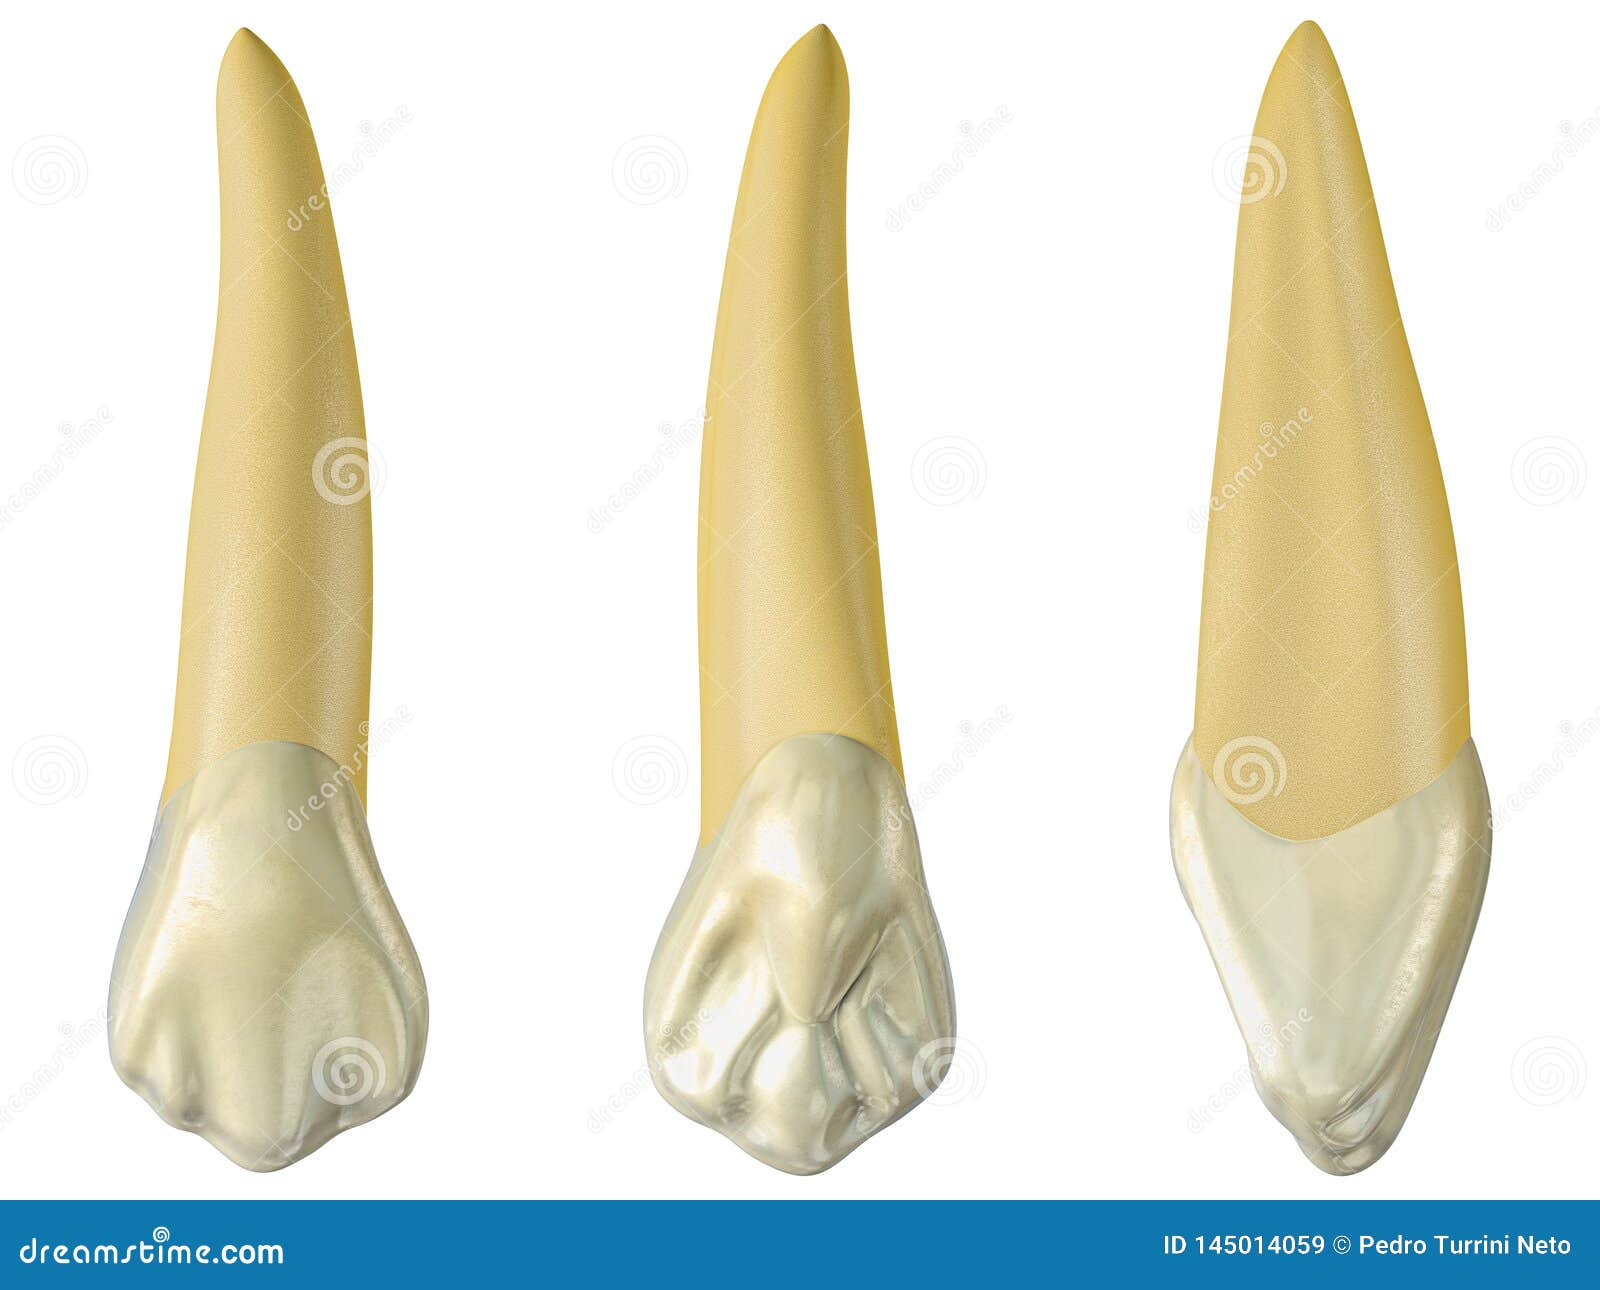 maxillary canine tooth in the buccal, palatal and lateral views. realistic 3d  of maxillary canine tooth